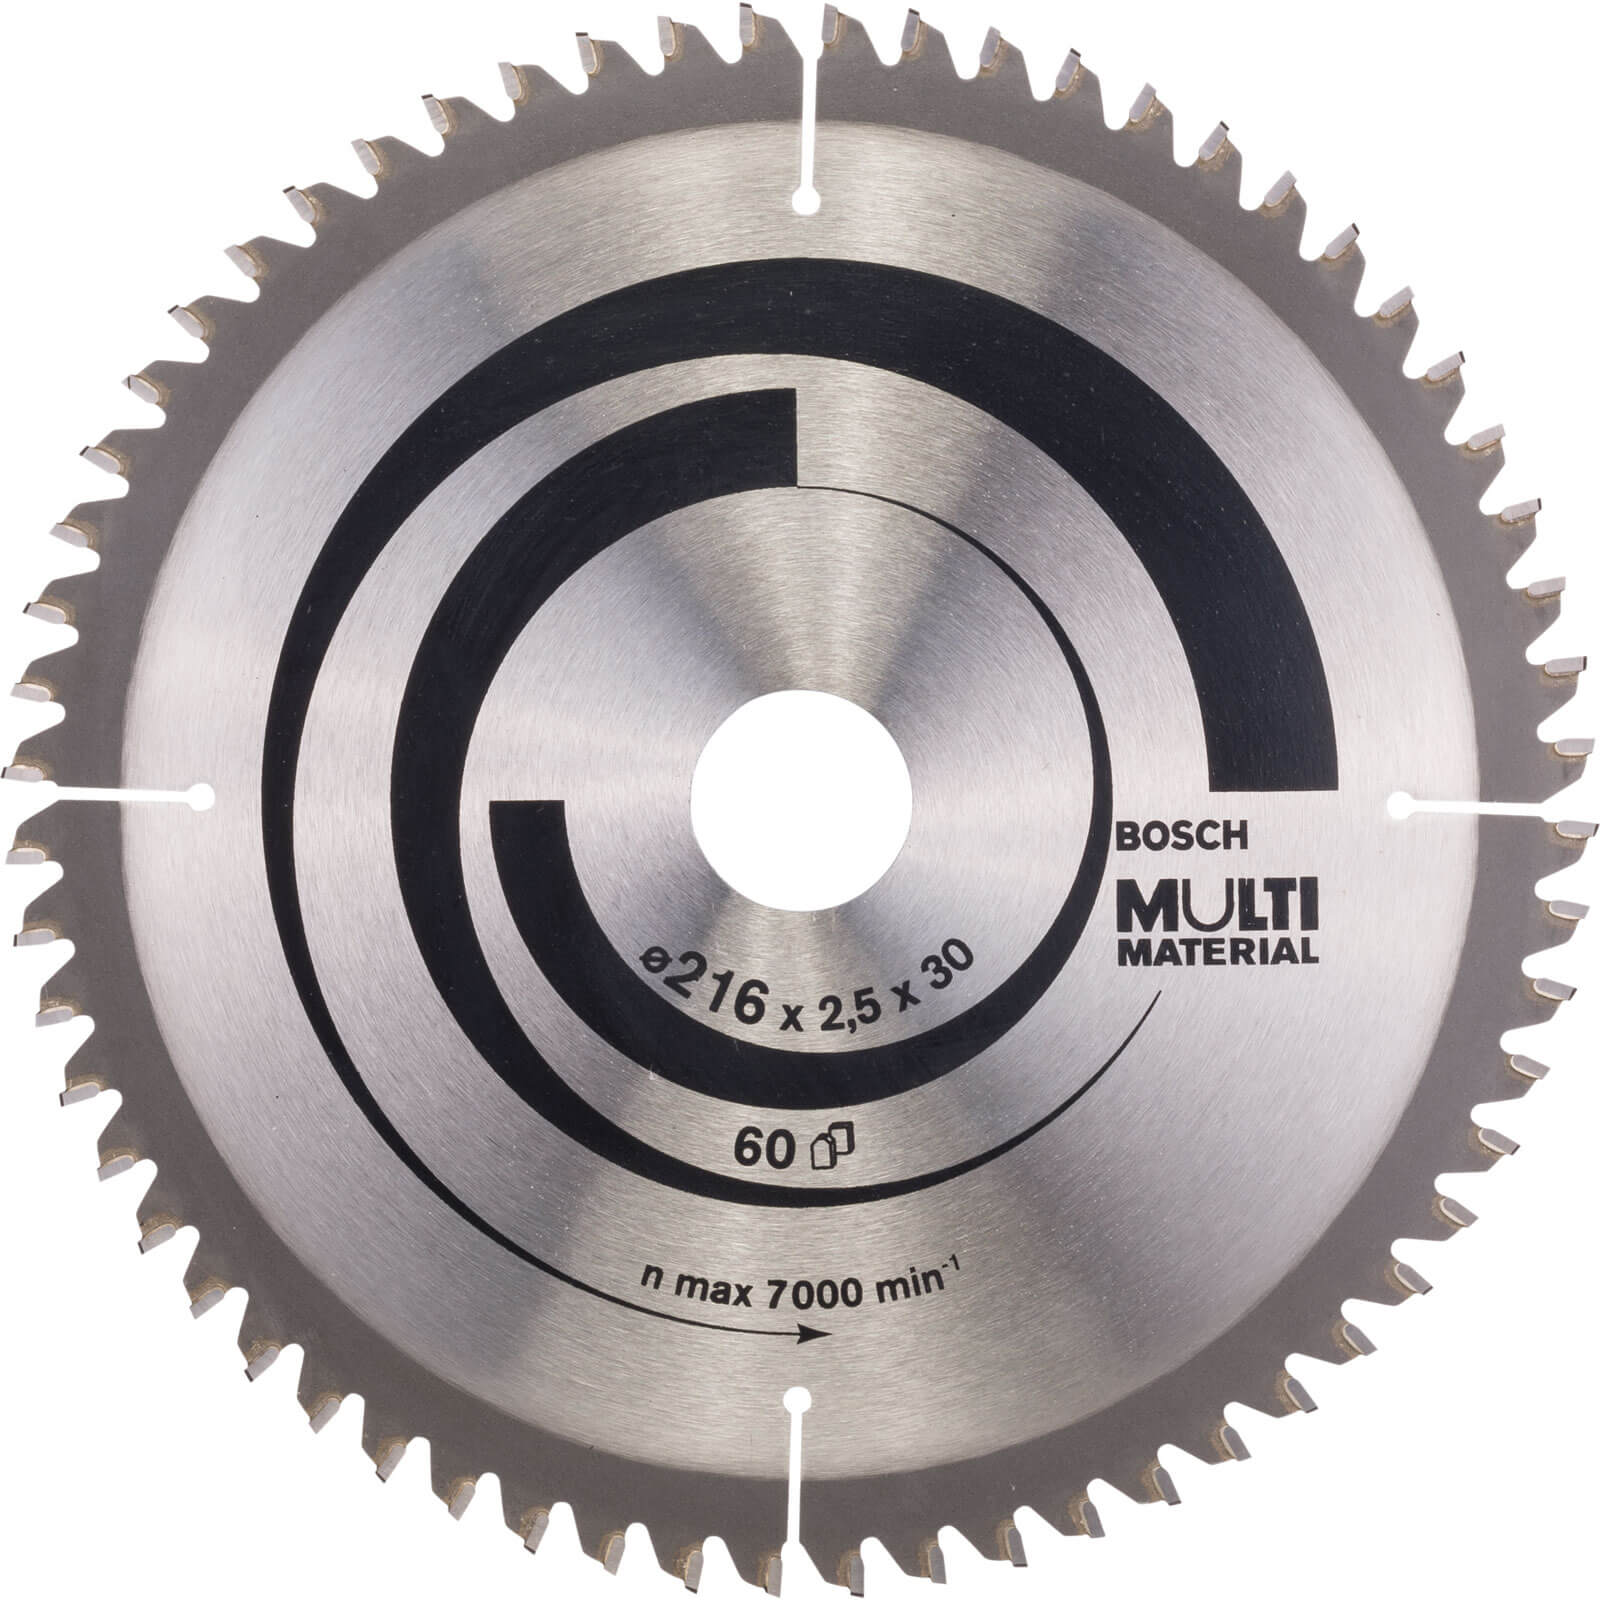 Image of Bosch Multi Material Cutting Mitre and Table Saw Blade 216mm 60T 30mm